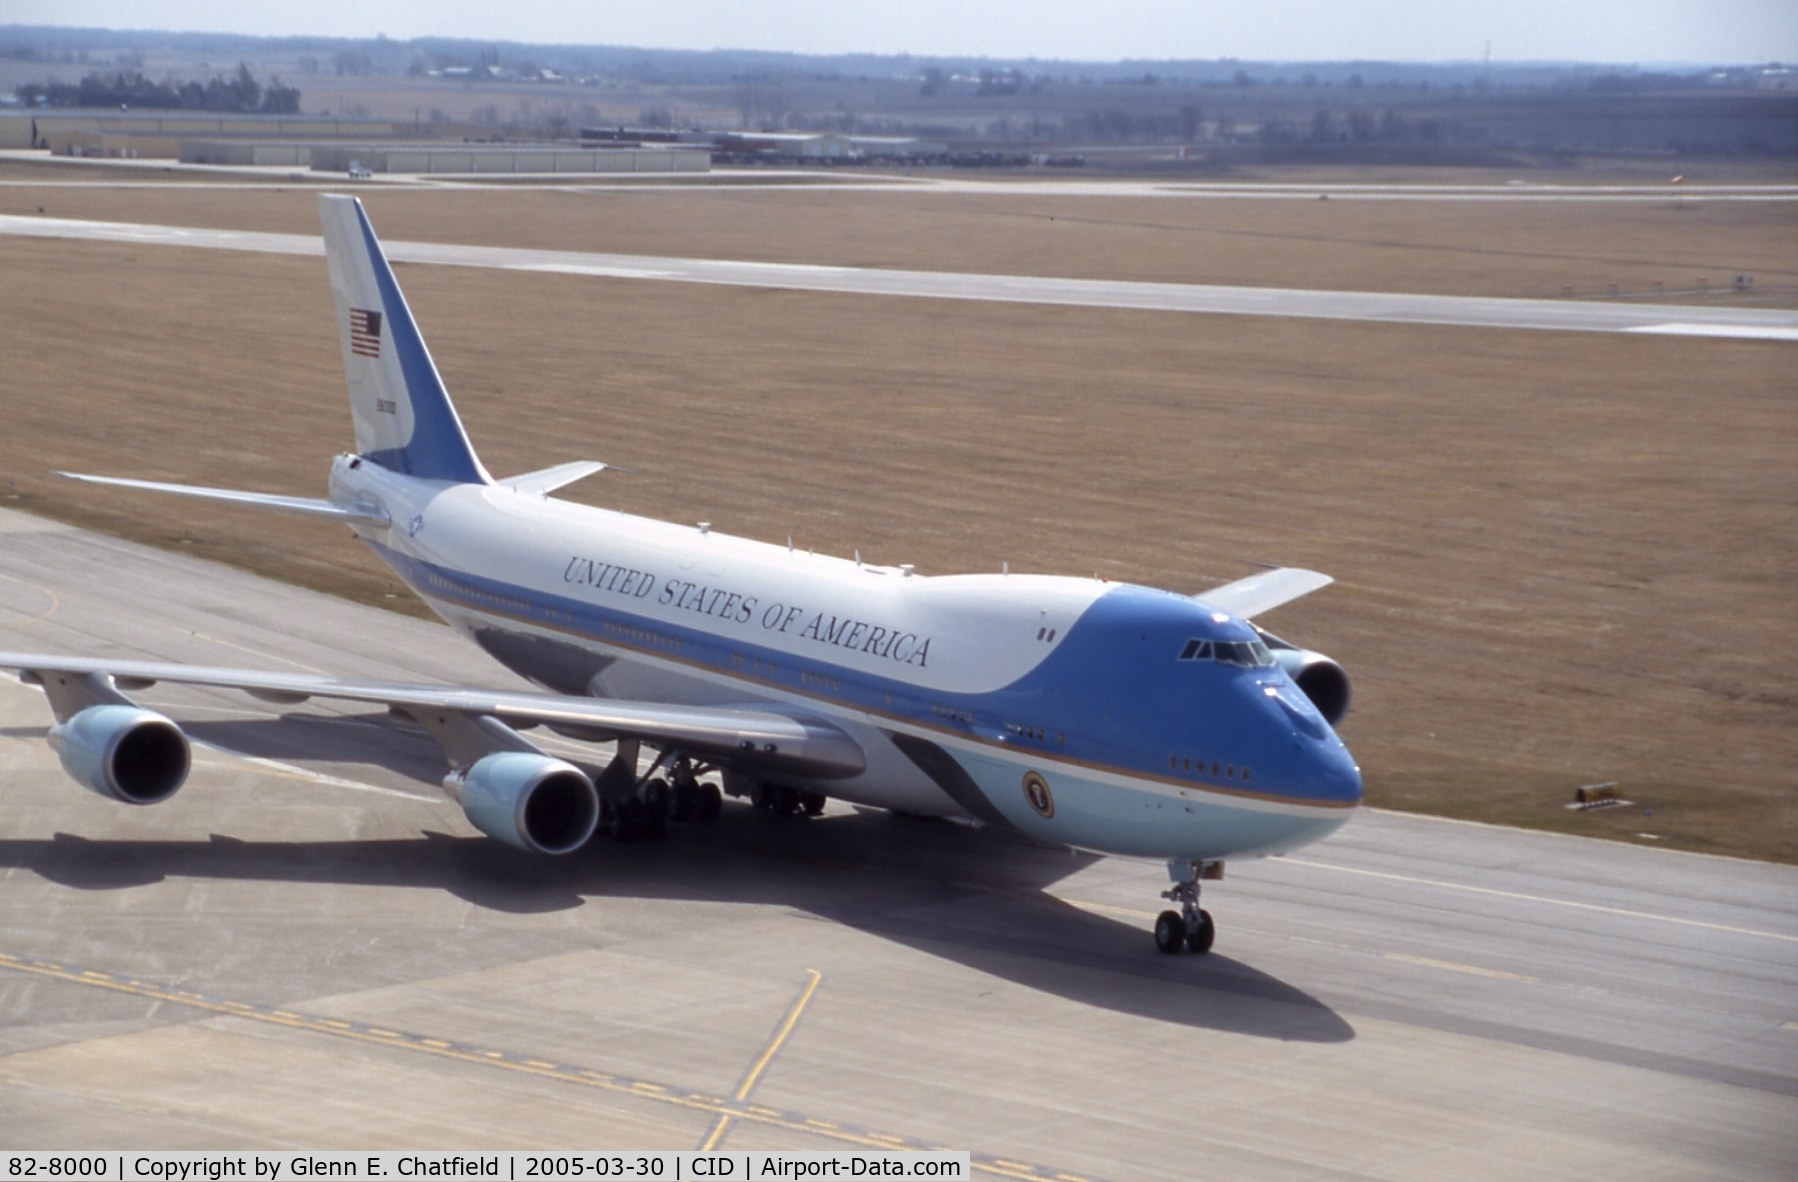 82-8000, 1987 Boeing VC-25A (747-2G4B) C/N 23824, Air Force One taxiing in from landing runway 9